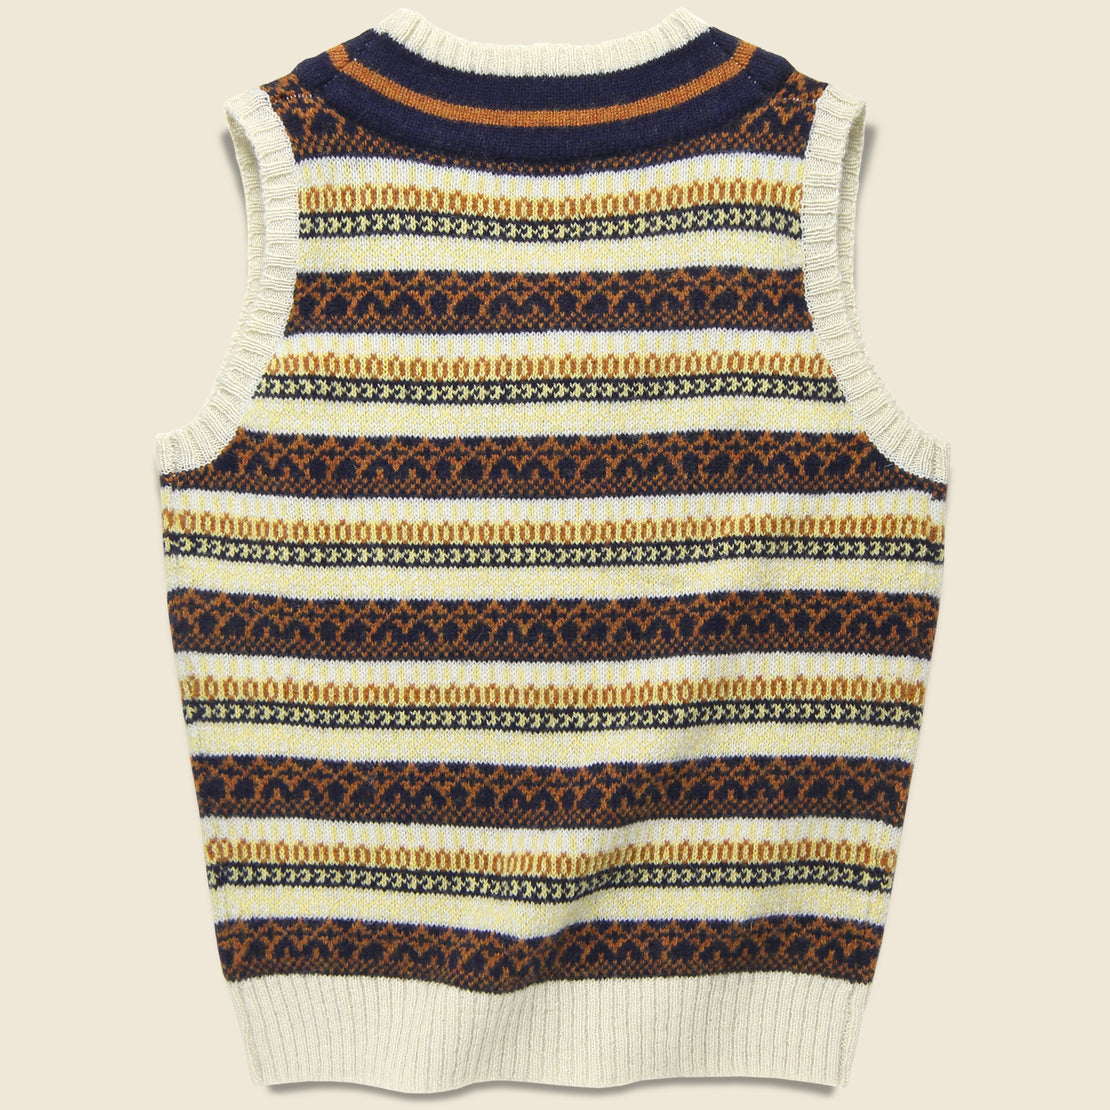 Cricket Sweater Vest - Cream Fair Isle - BEAMS+ - STAG Provisions - Tops - Sweater